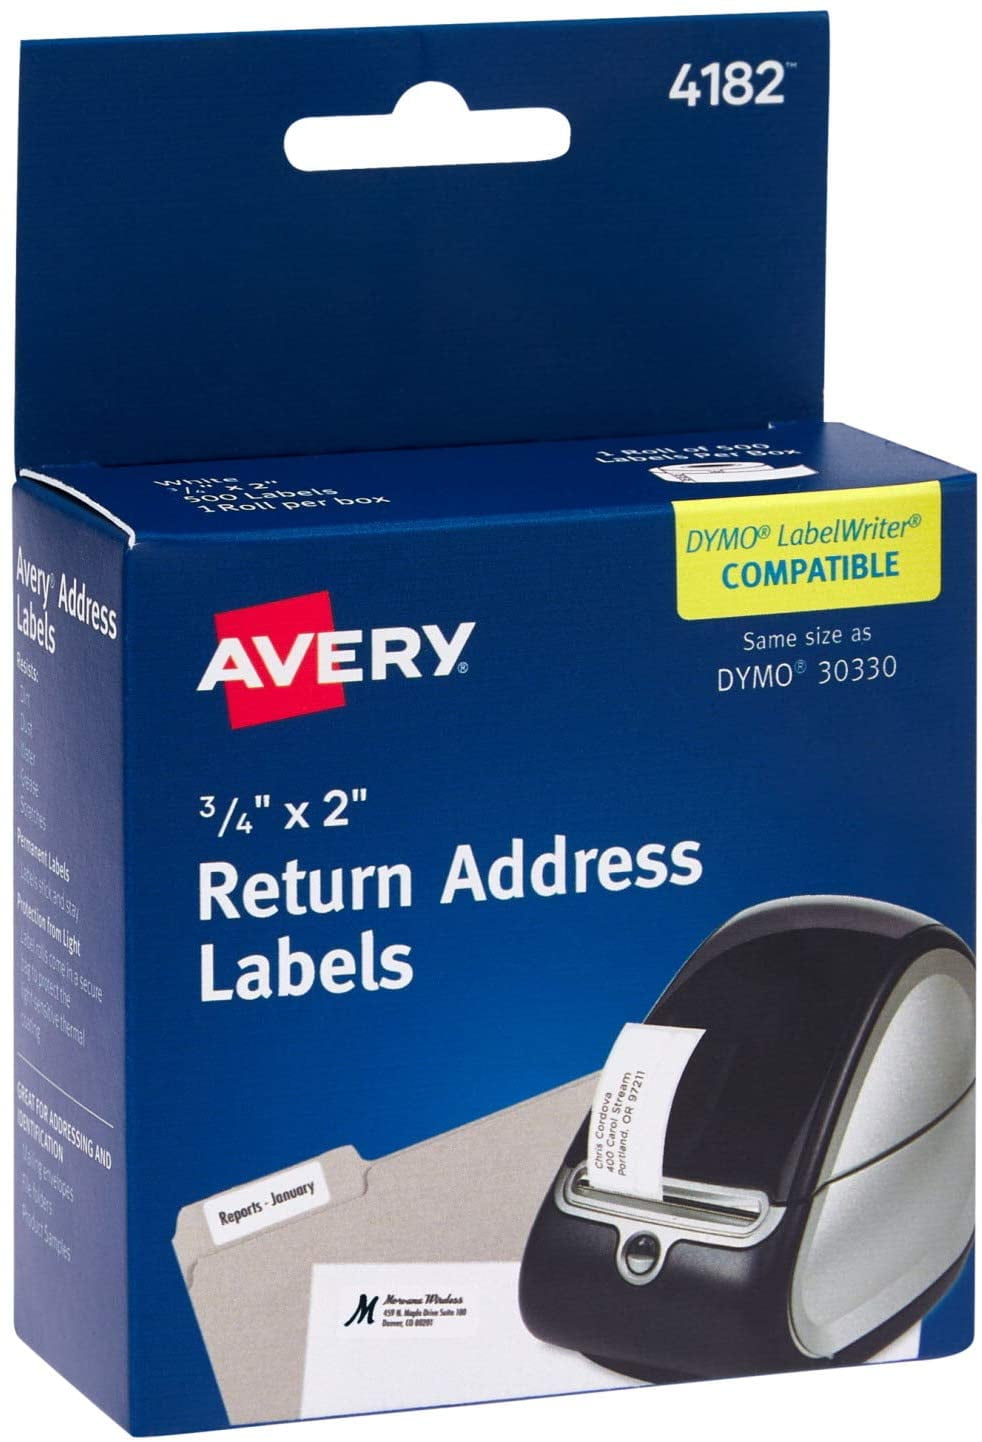 Avery Thermal Roll Labels 34 X 2 White 500 Multipurpose Labels Per Roll 1 Roll 4182 3183